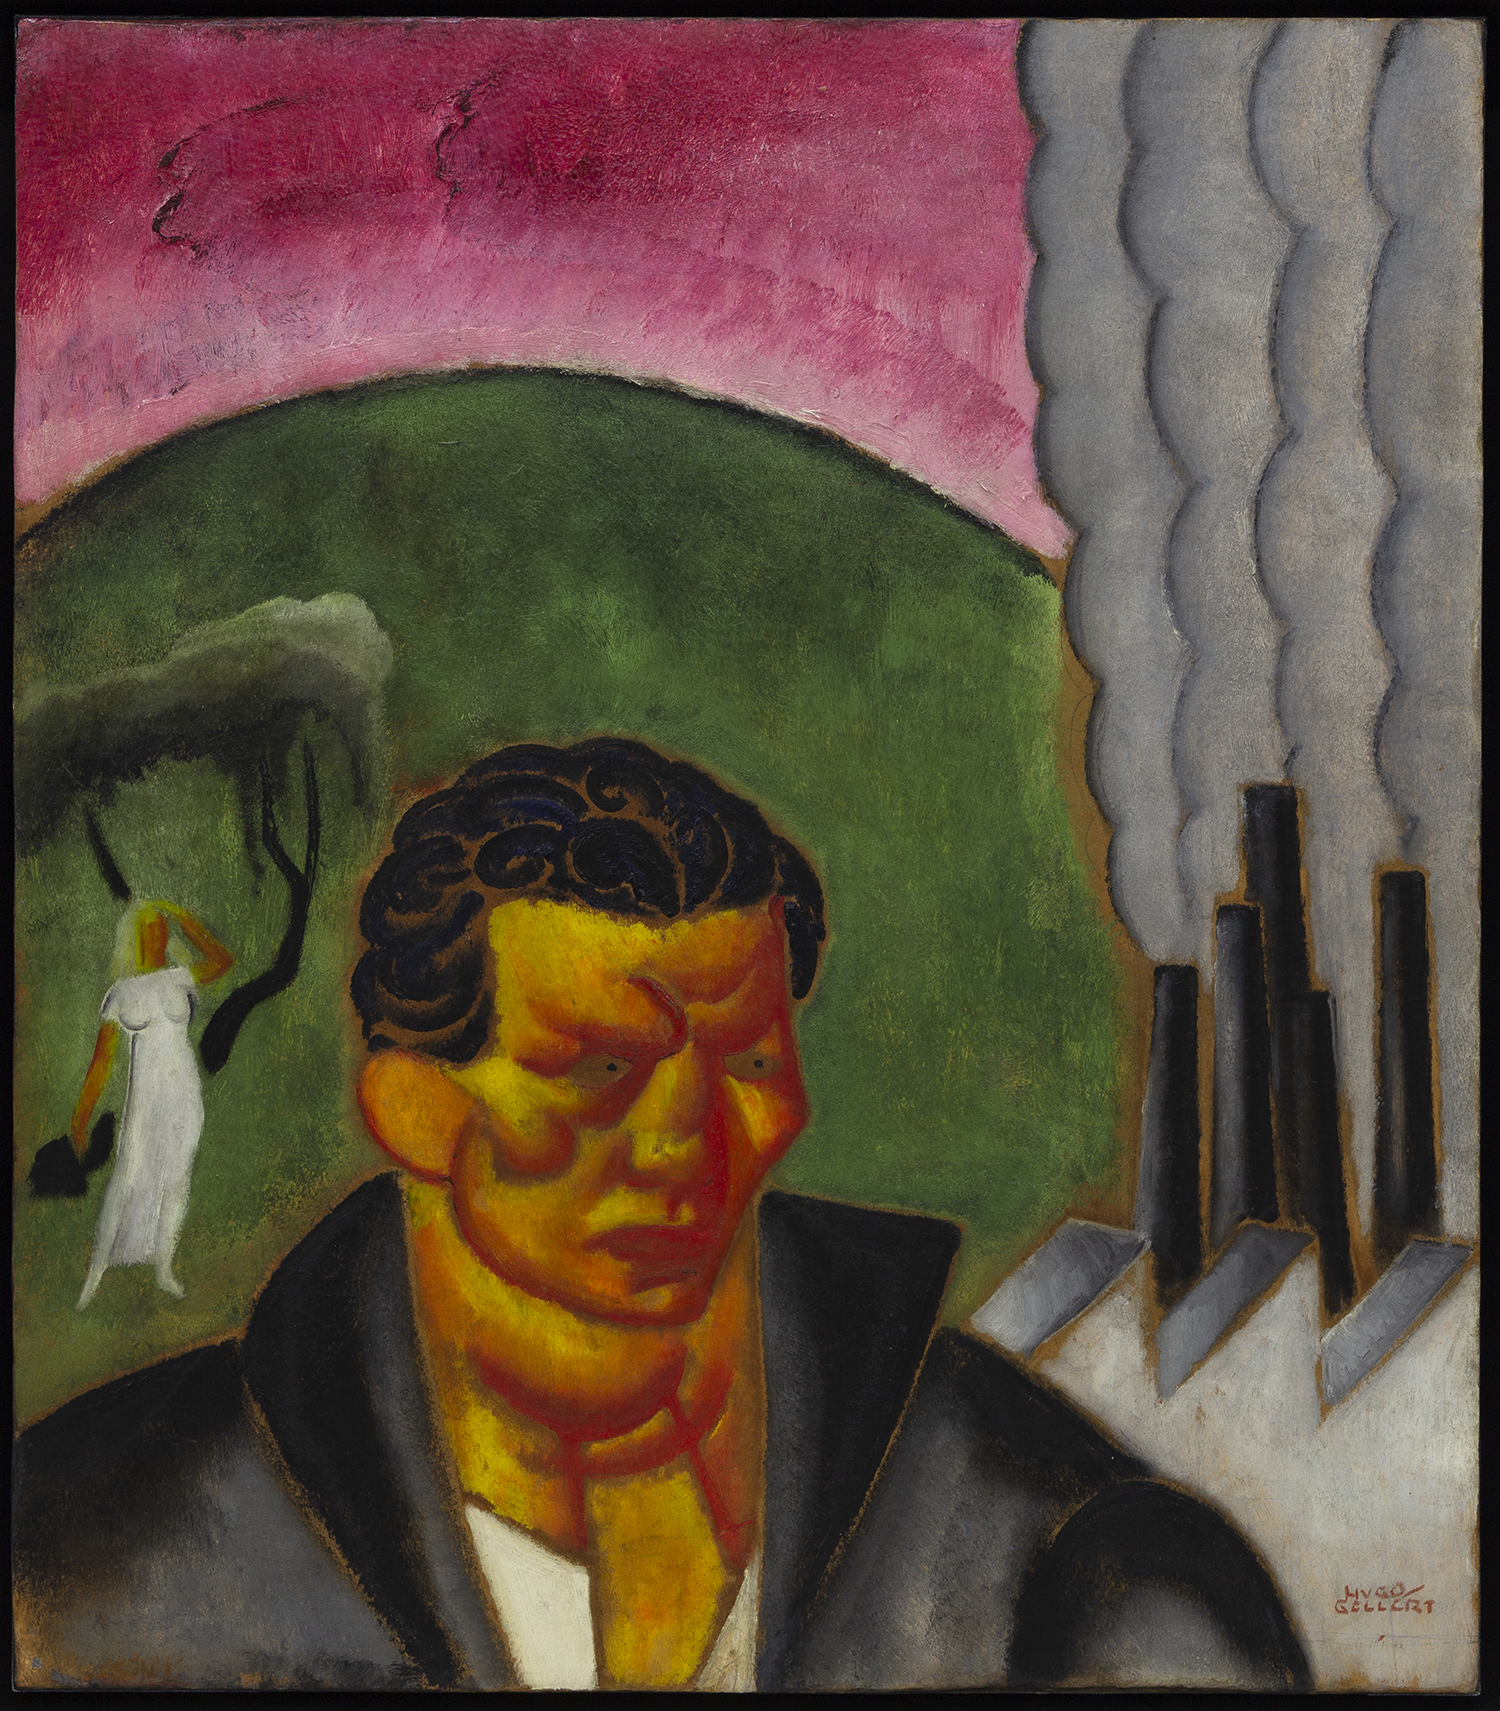 Untitled (Figure with Smokestacks), ca. 1920s, Oil on masonite, 24 1/4 x 21 1/8 inches (61.6 x 53.7 cm)